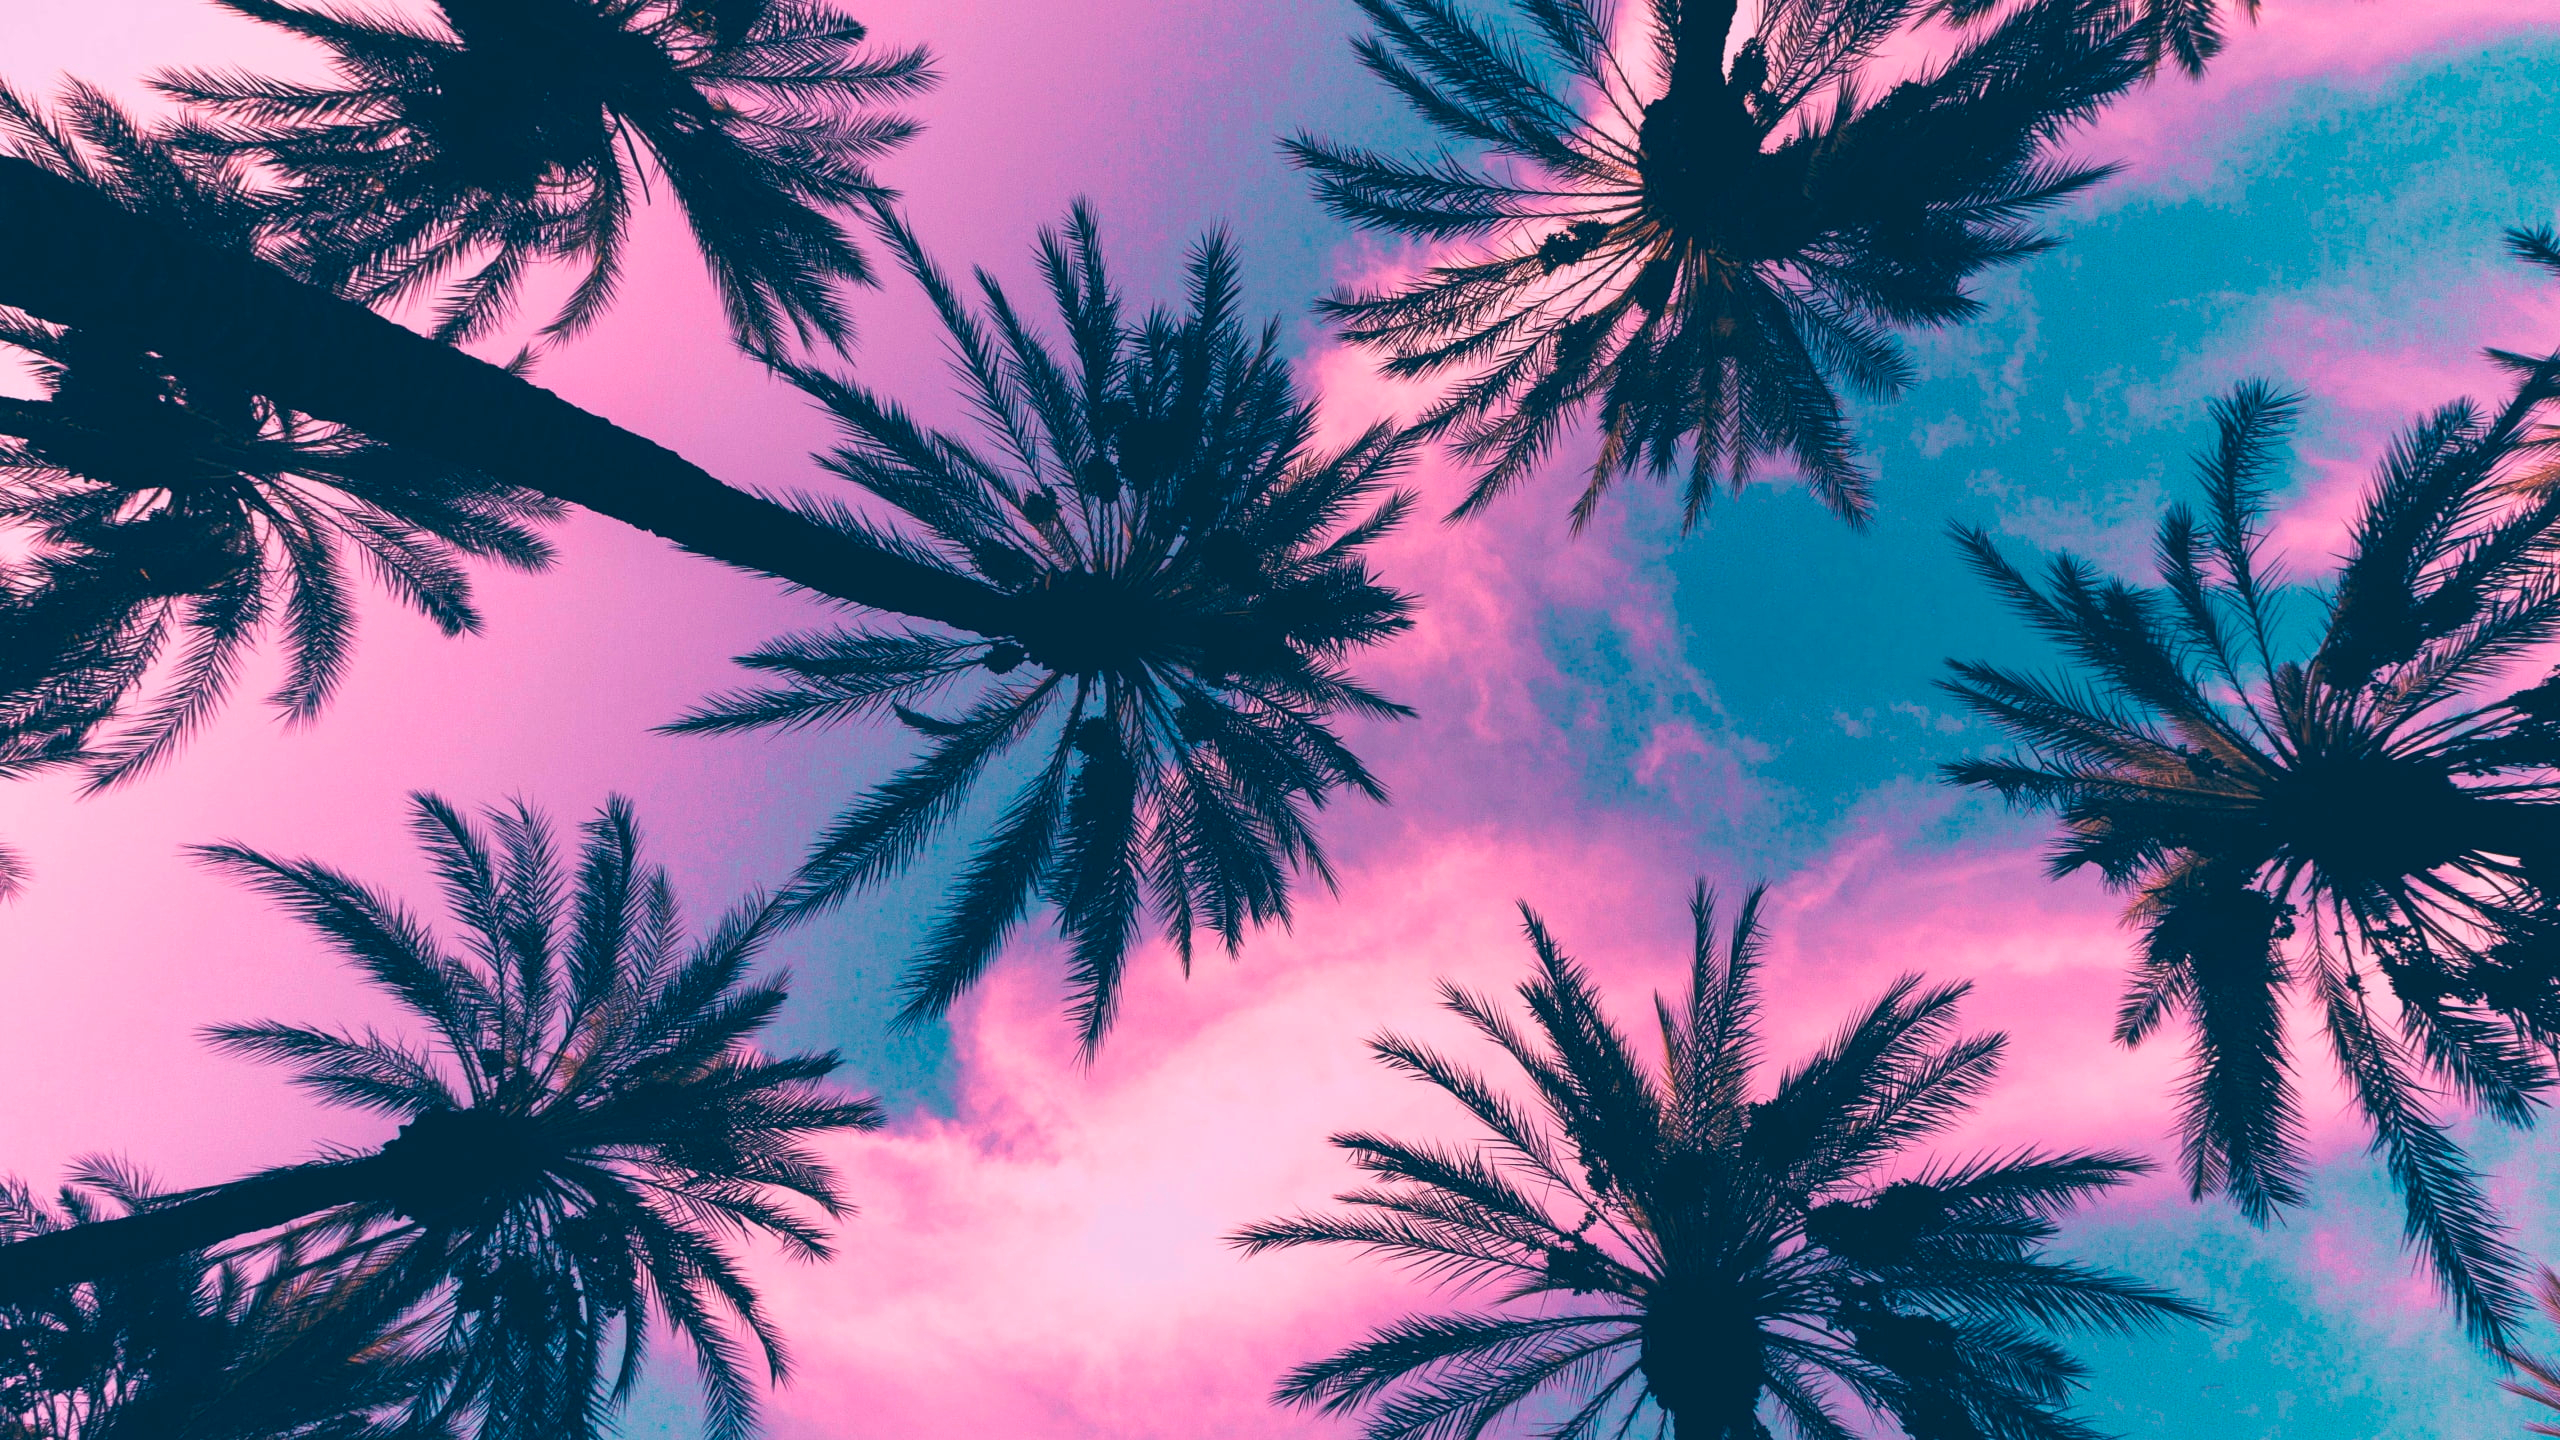 Coconut plant, palm trees, sky, clouds, pink, tropical climate wallpaper